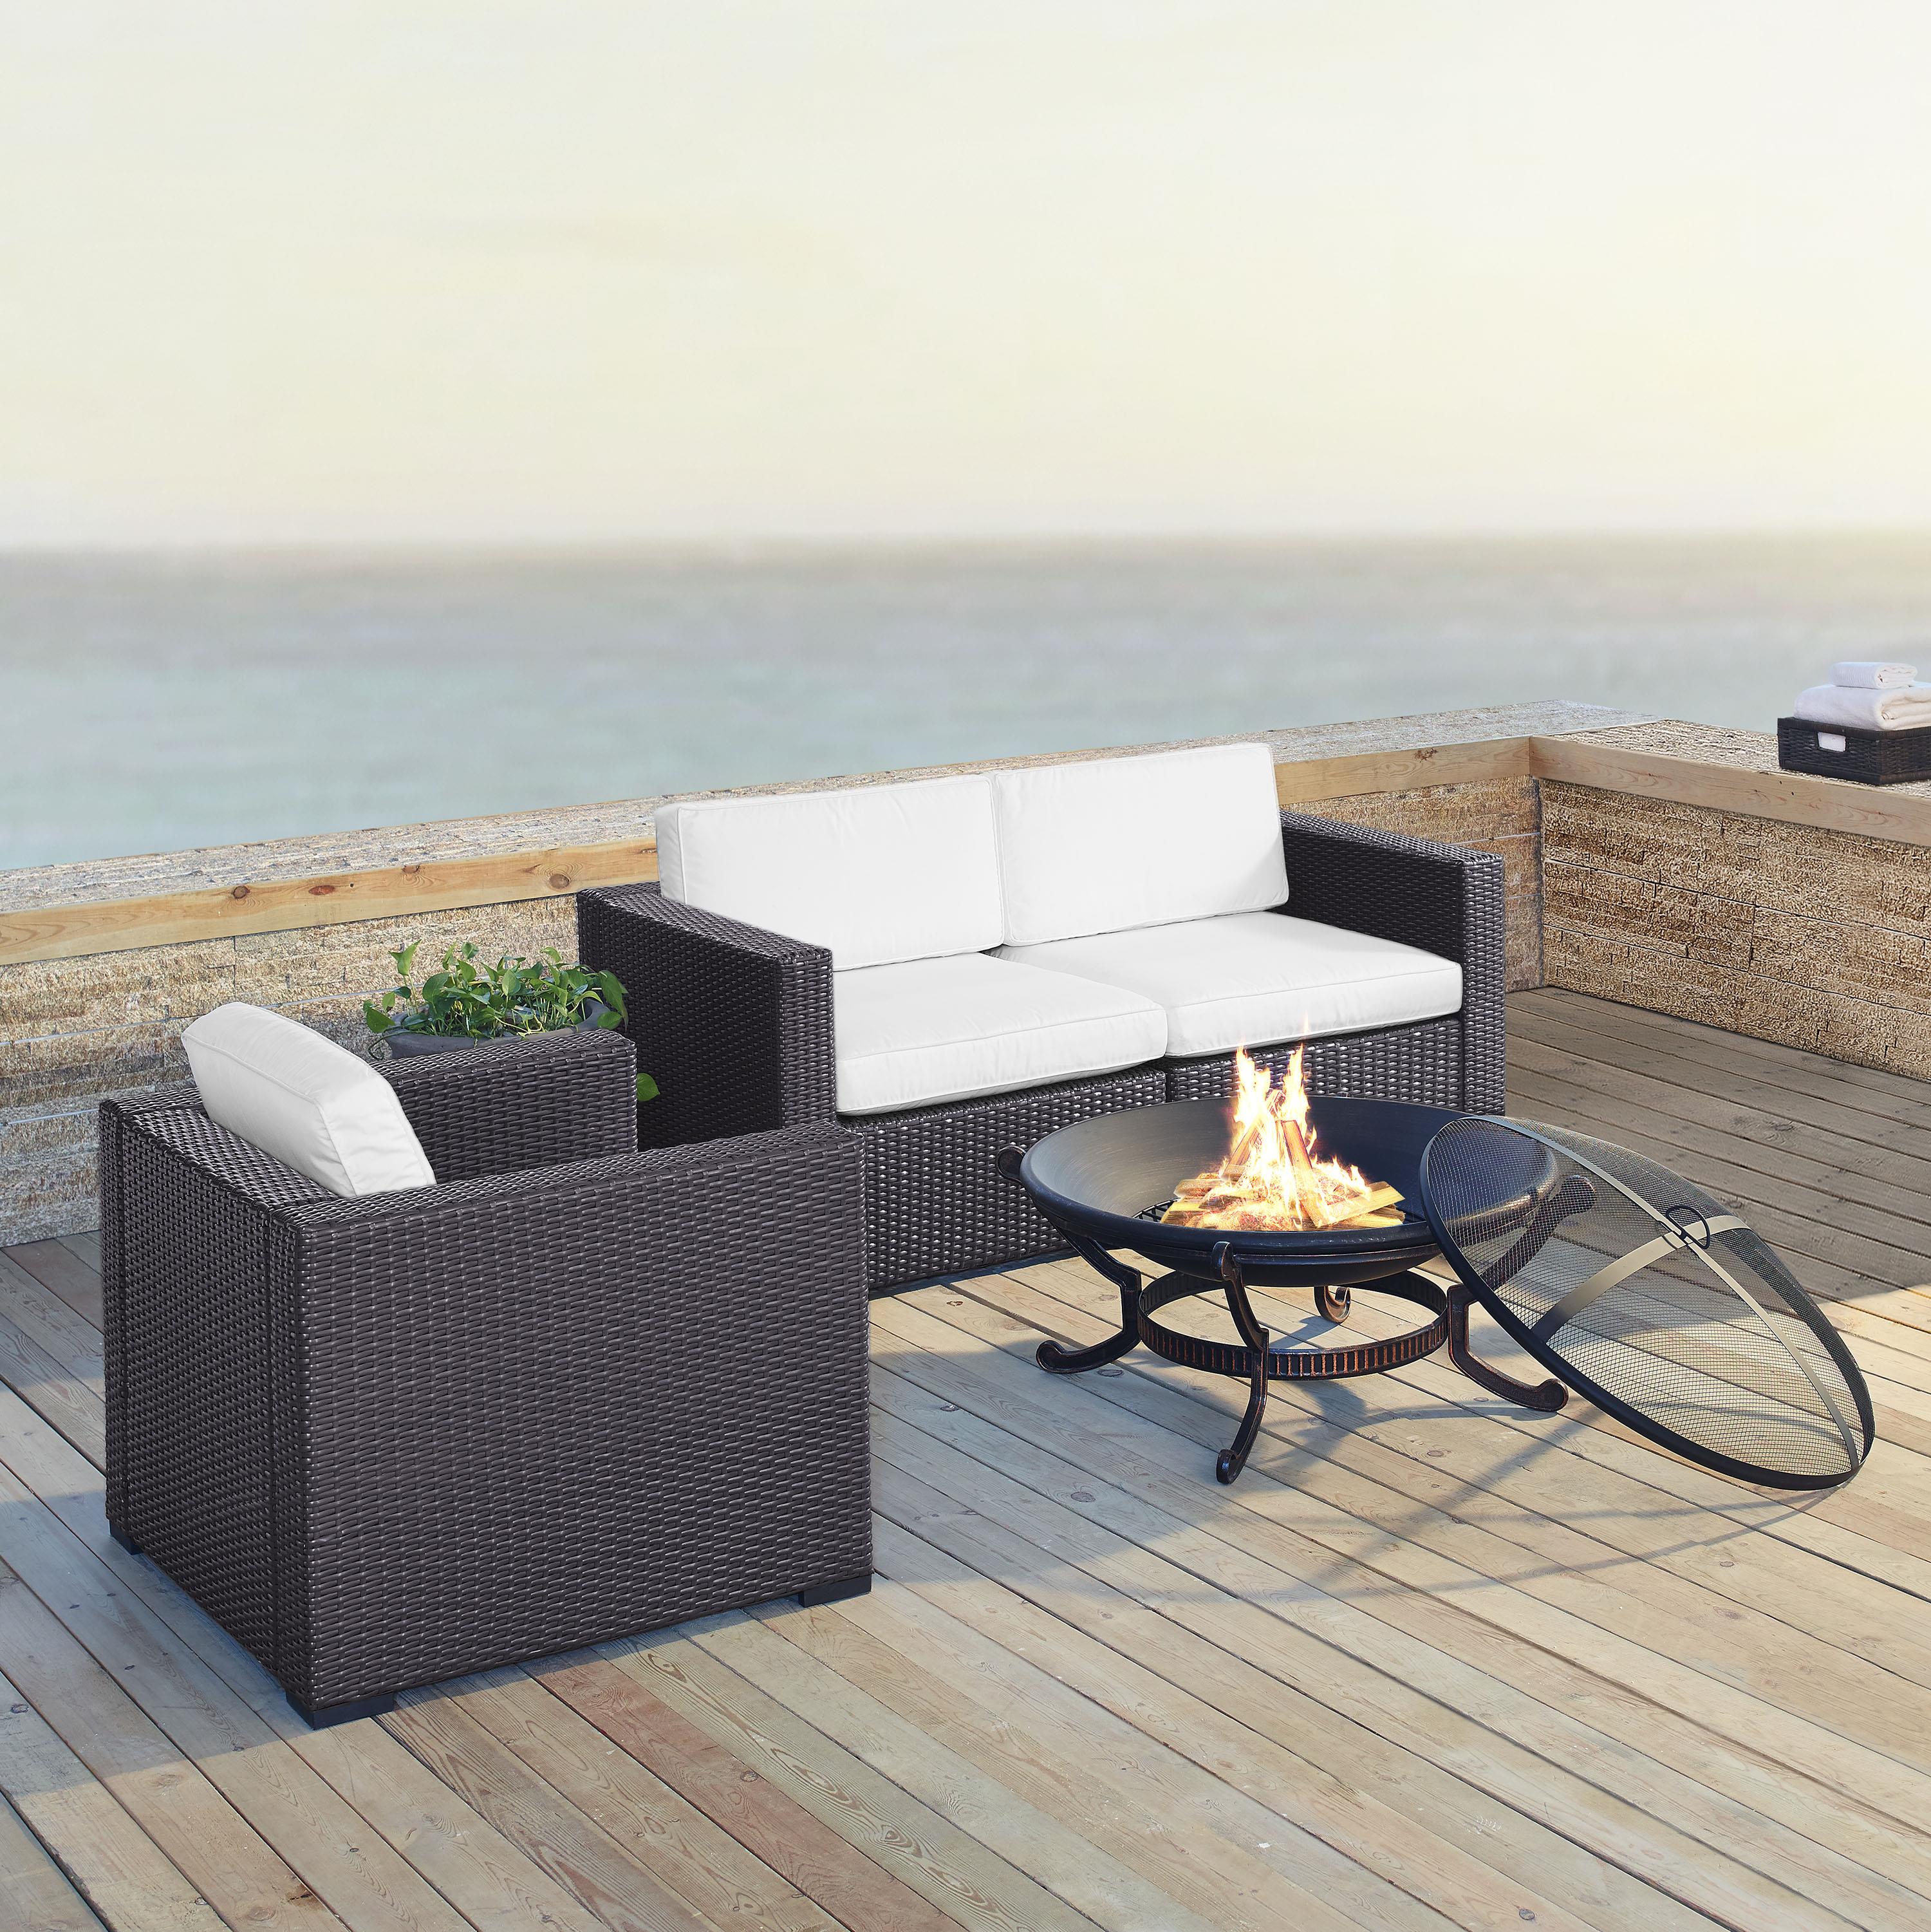 Crosley Biscayne 4 Piece Wicker Patio Fire Pit Sofa Set in Brown and White - image 4 of 4